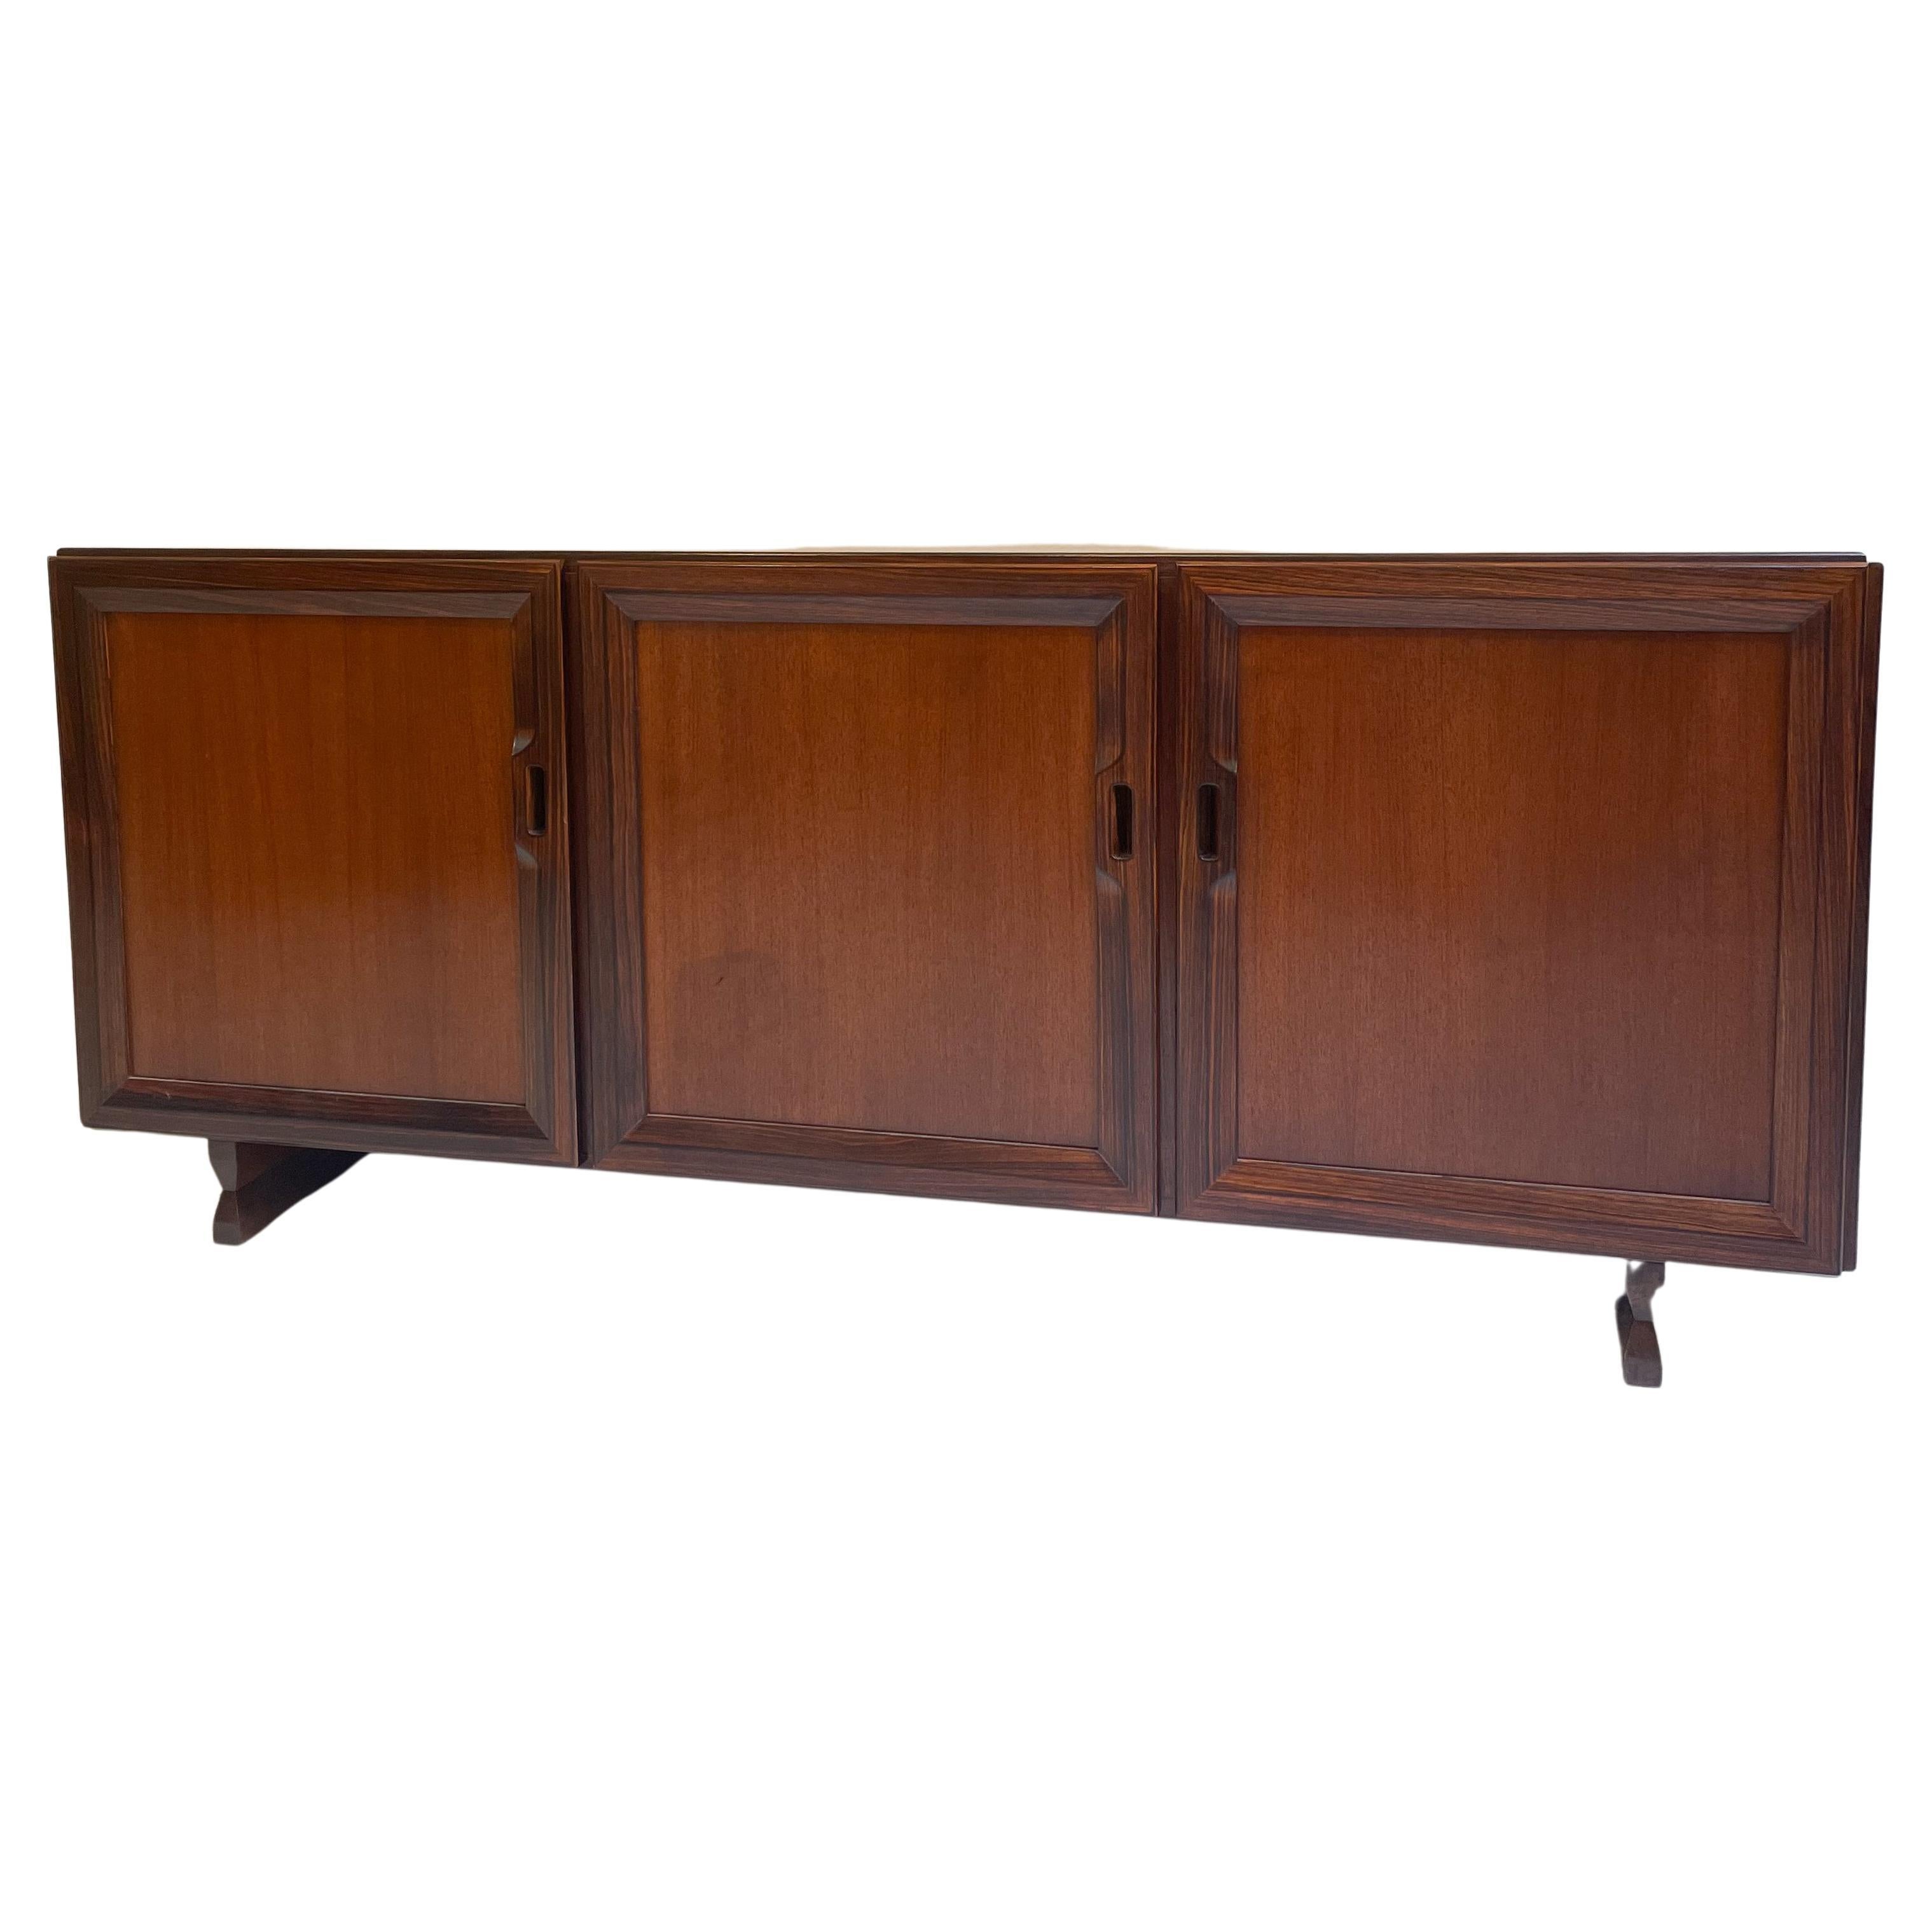 Mid-Century Modern Sideboard MB 51 by Fanco Albini for Poggi, Italy, 1950s

Sideboard with 3 doors. which features a simplistic design with sharp lines.  Due the tapered high legs, the sideboard has an open and elegant appearance. The extravagant